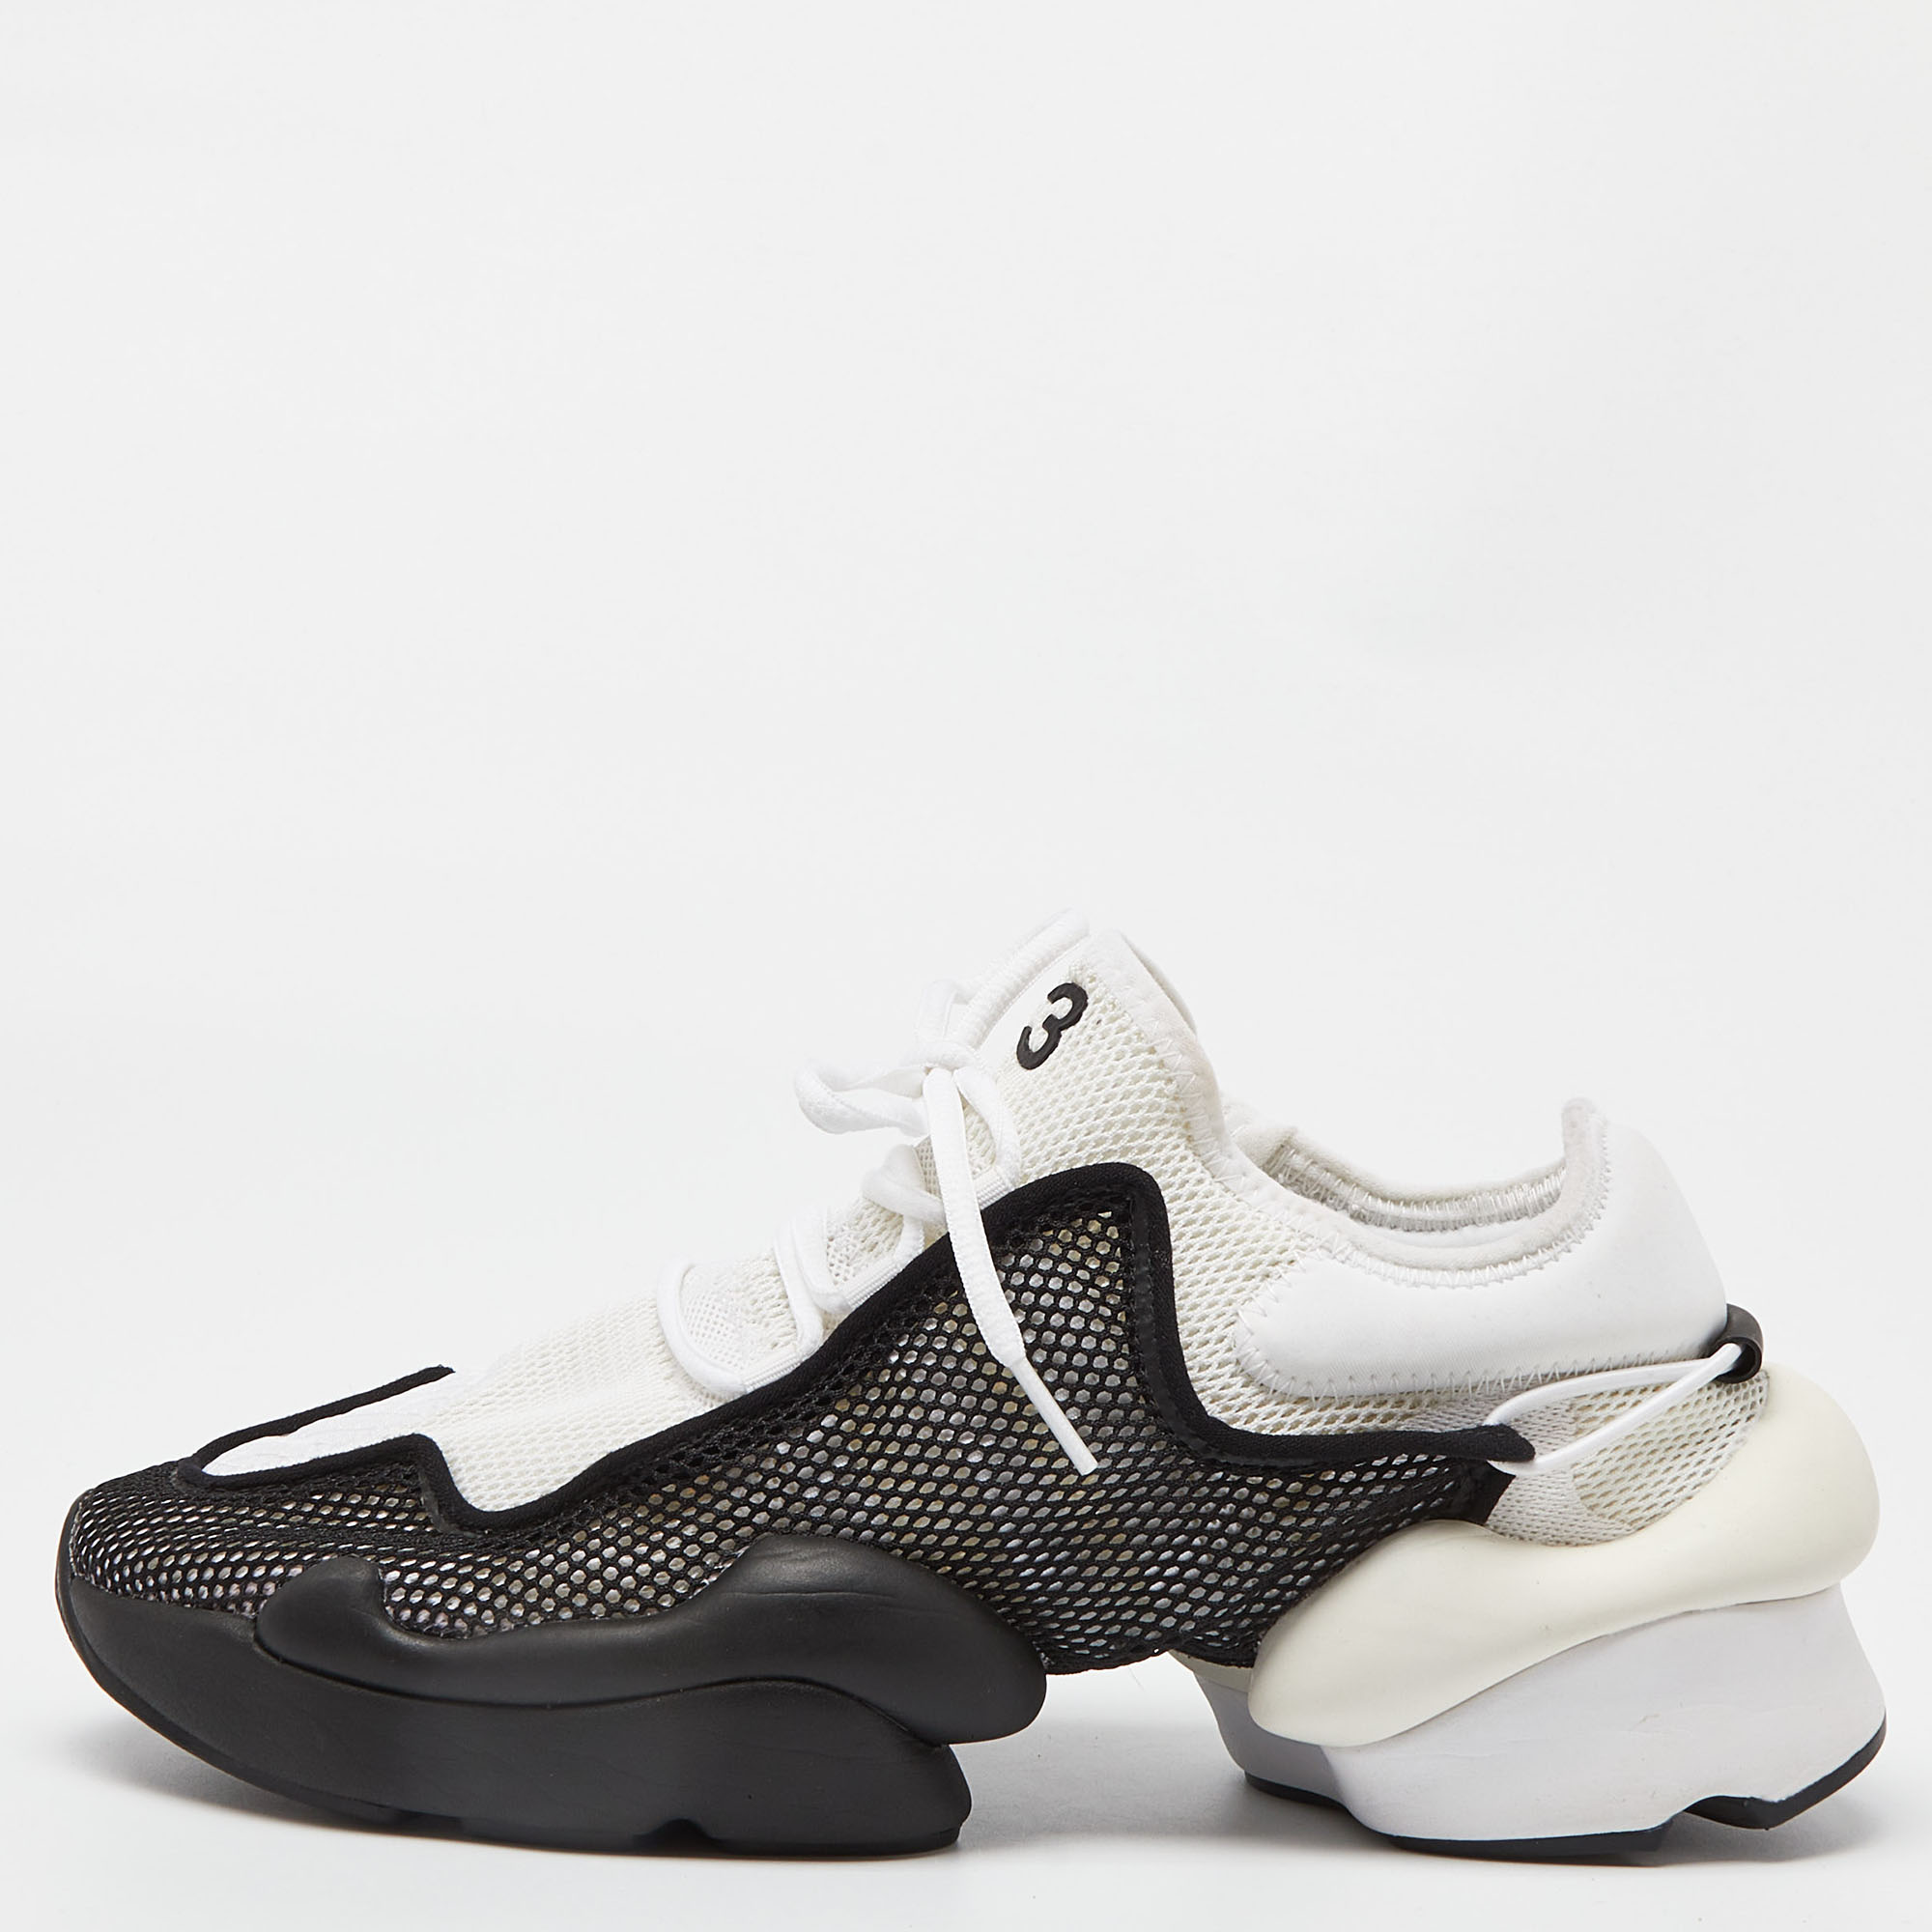 

Y-3 Adidas White/Black Mesh Low Top Sneakers Size 44